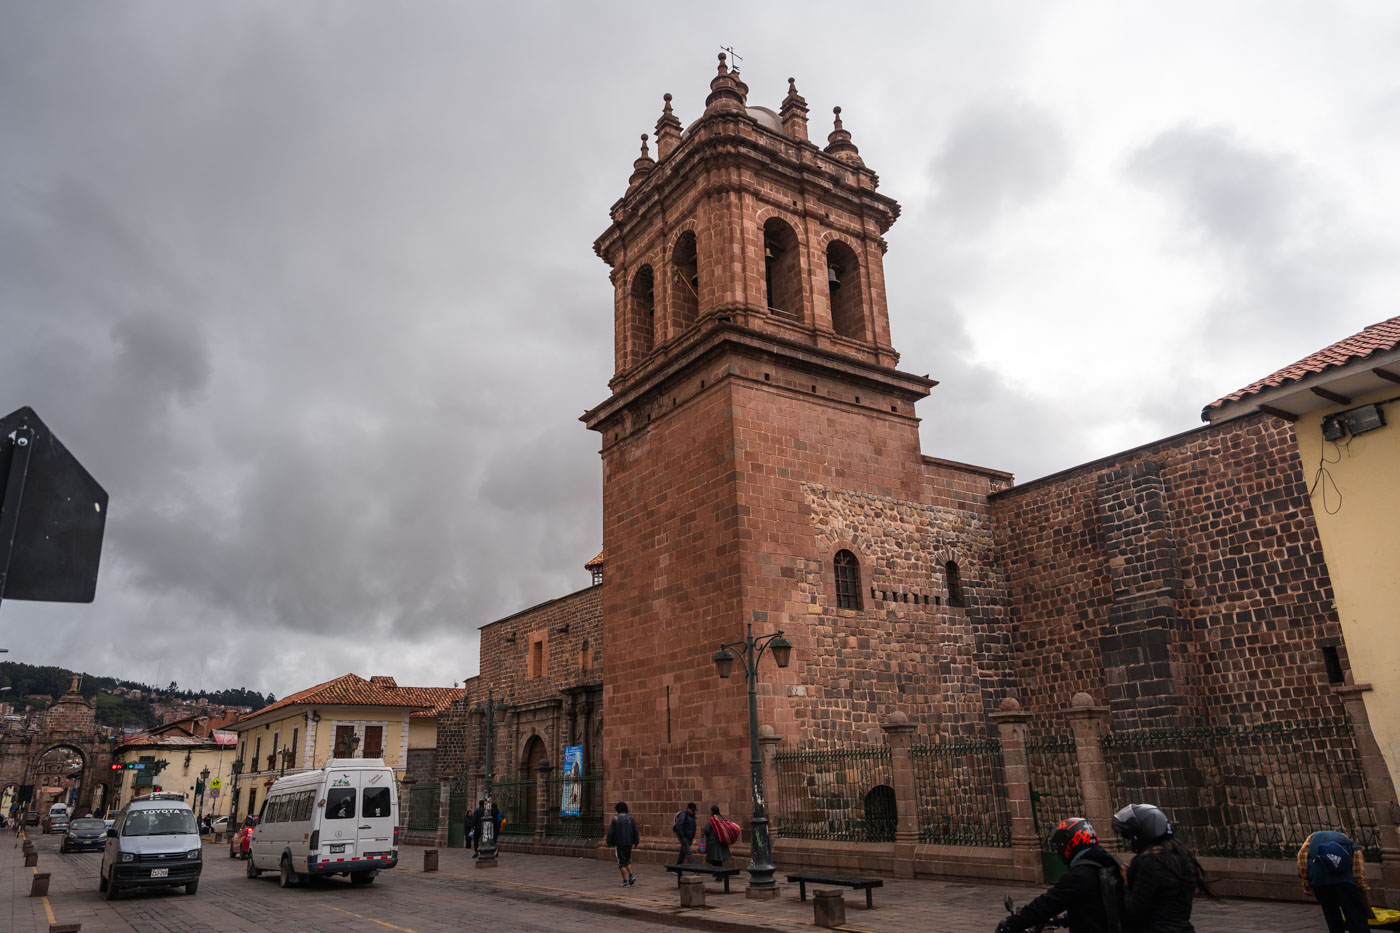 Cars and people passing by Iglesia Convento de Santa Clara in Cusco on an overcast day.